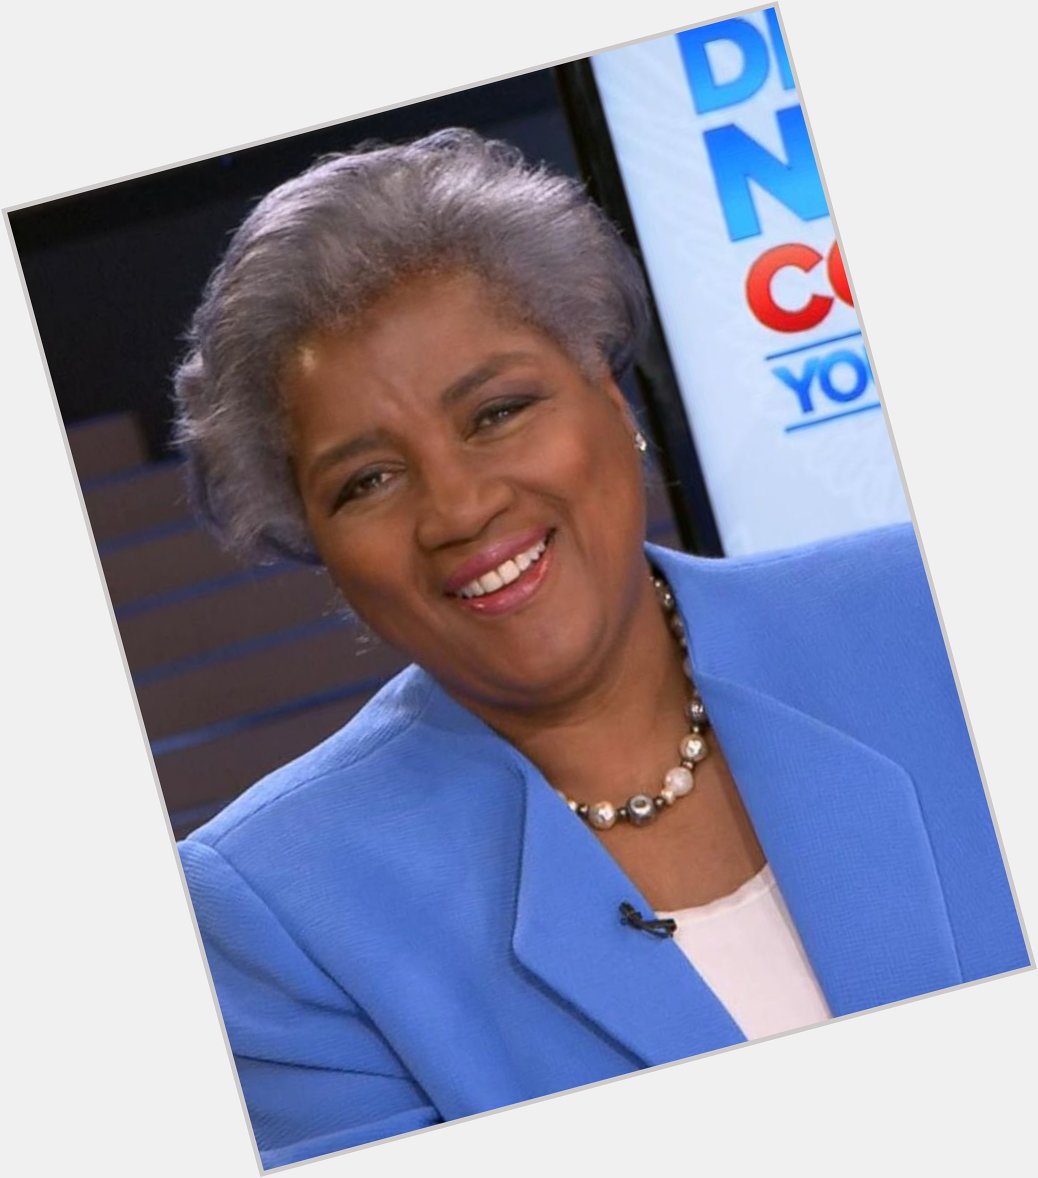 Happy Belated Birthday to Donna Brazile! 